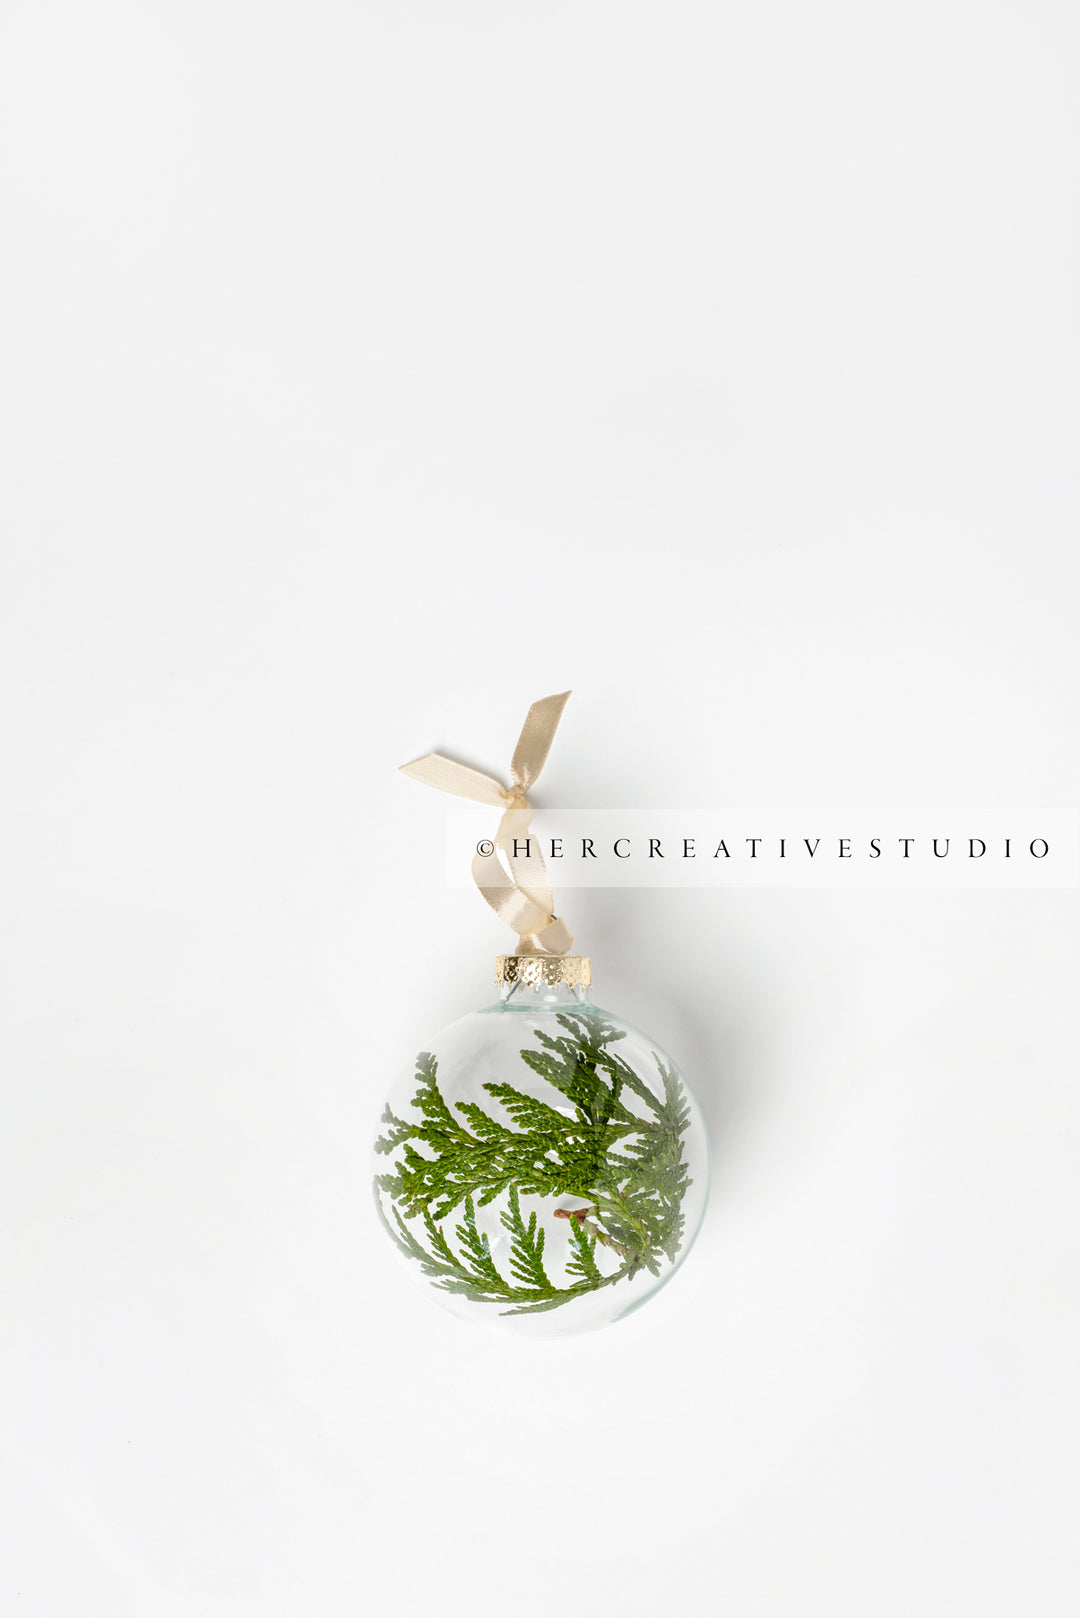 Clear & Green Tree Ornament on White Background, Styled Image